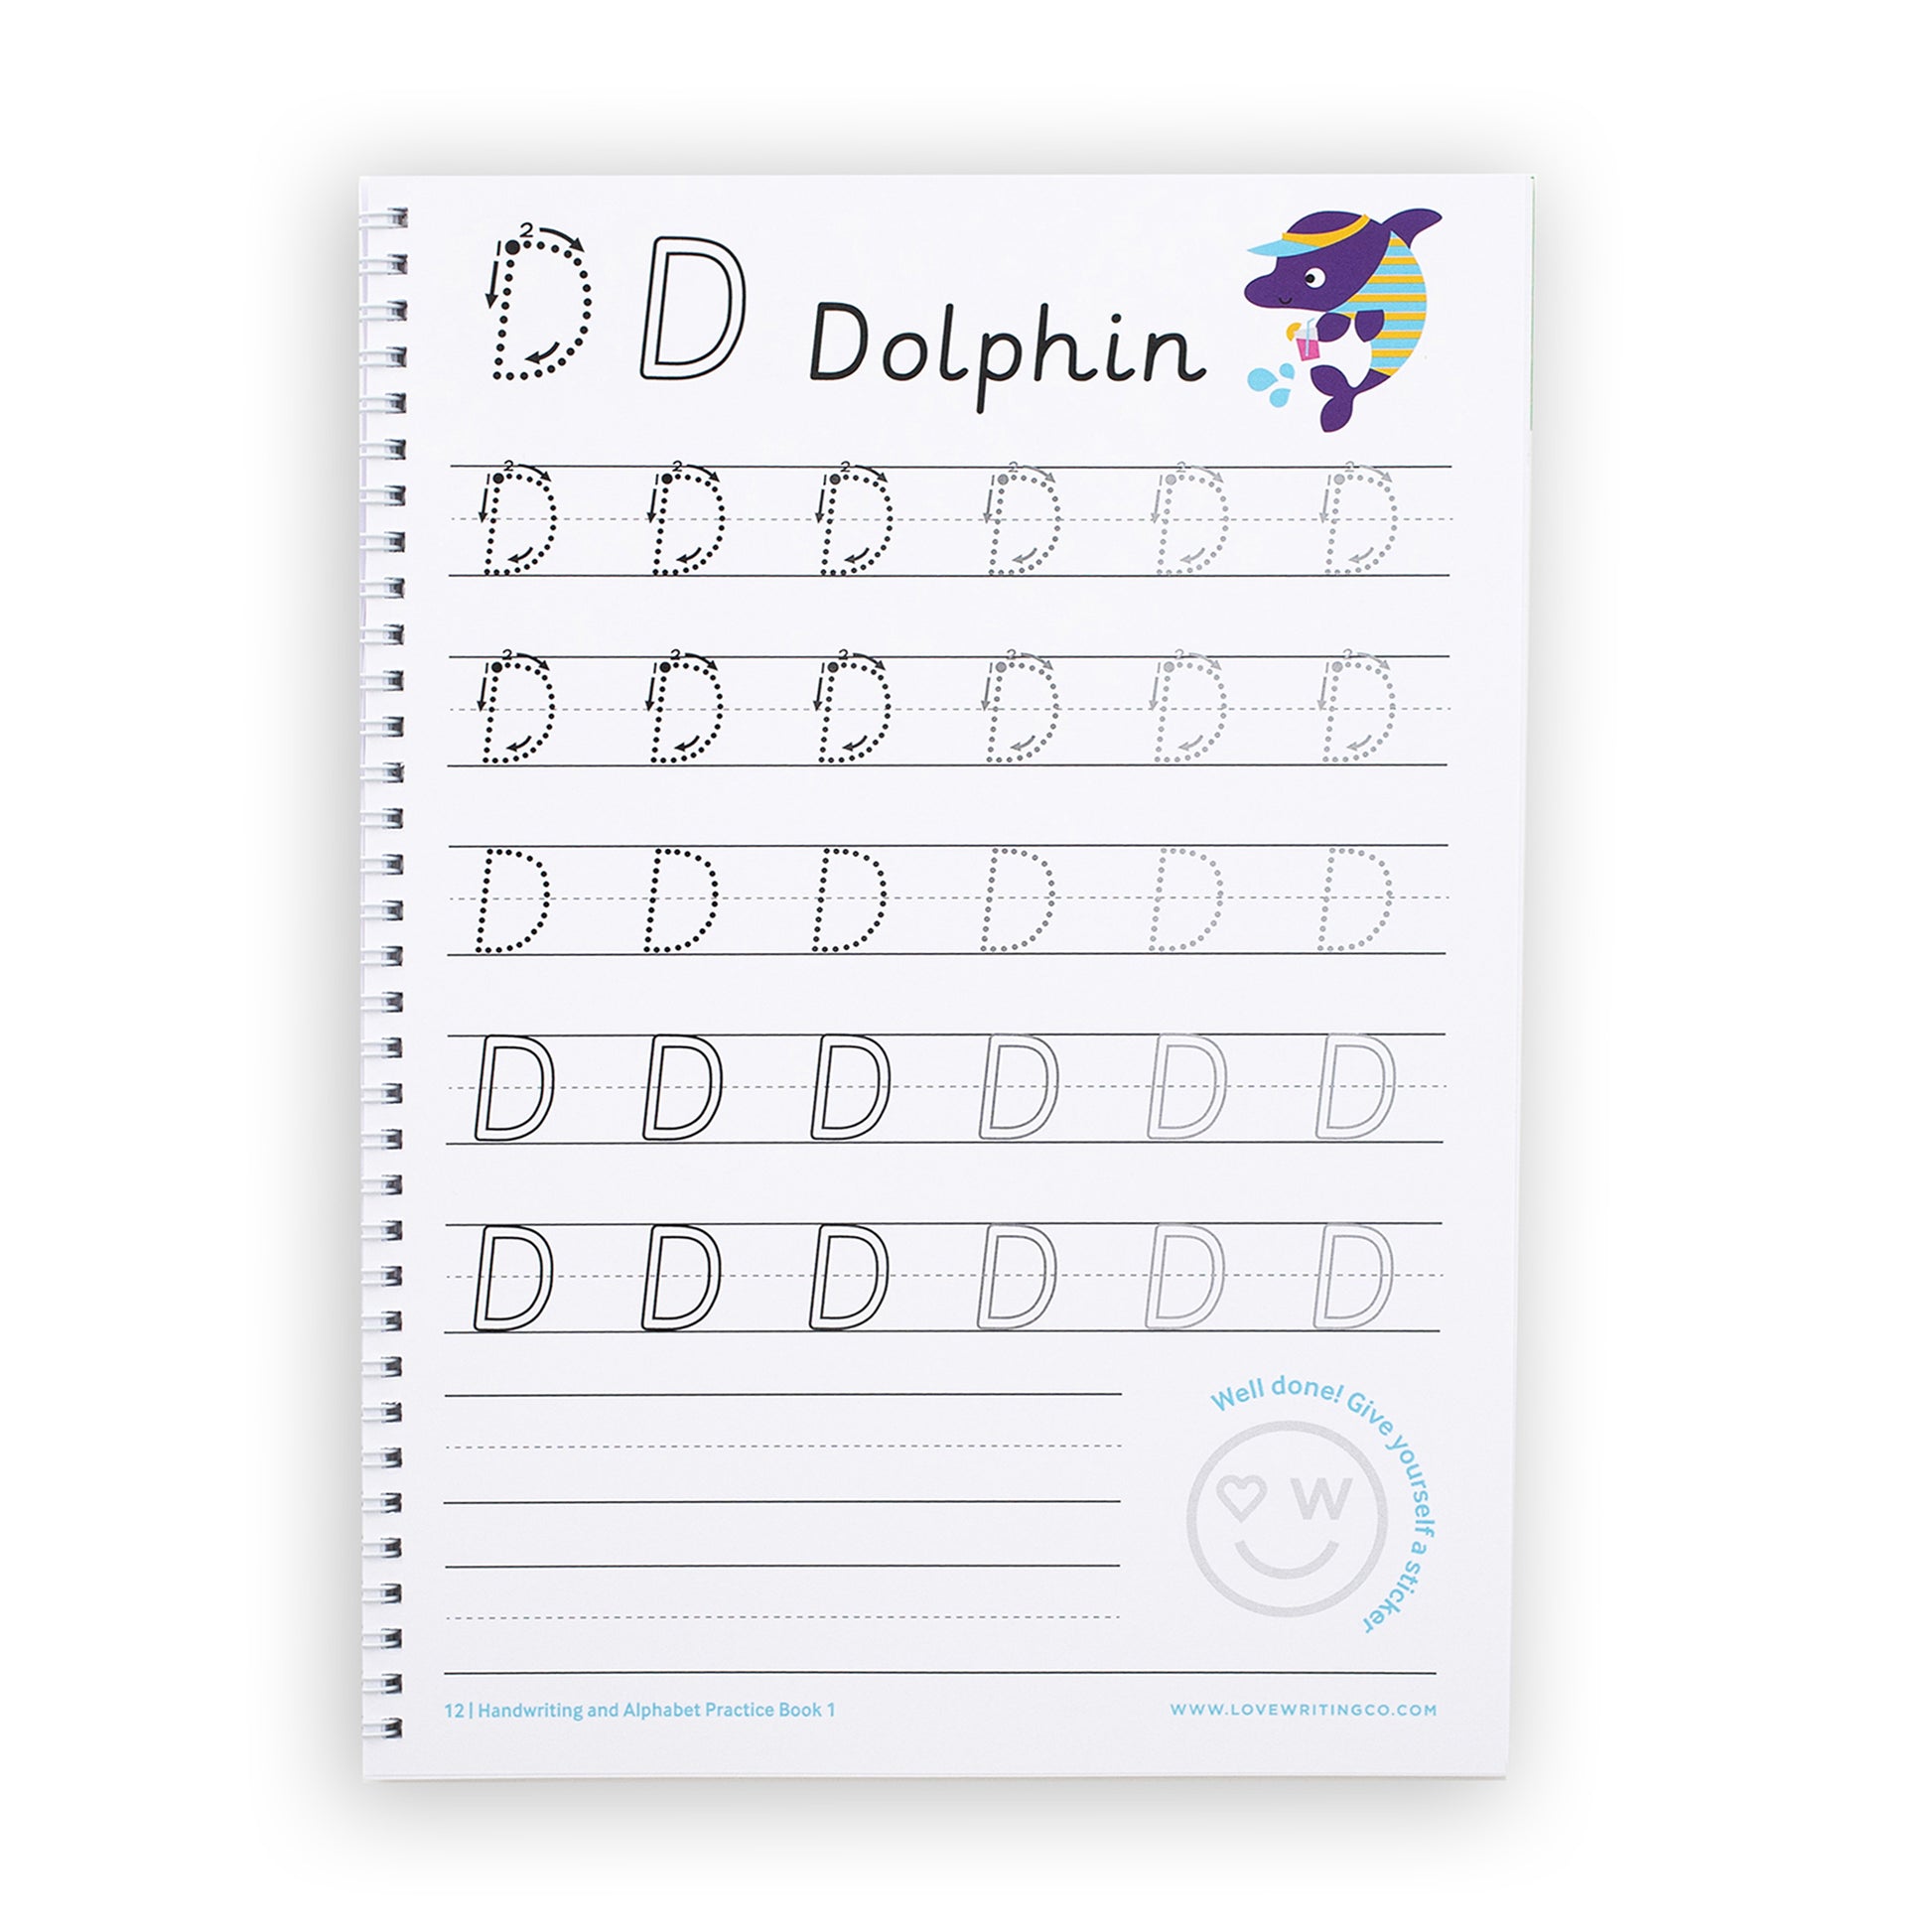 Writing practice workbook page with dotted lines learn to write the letter D